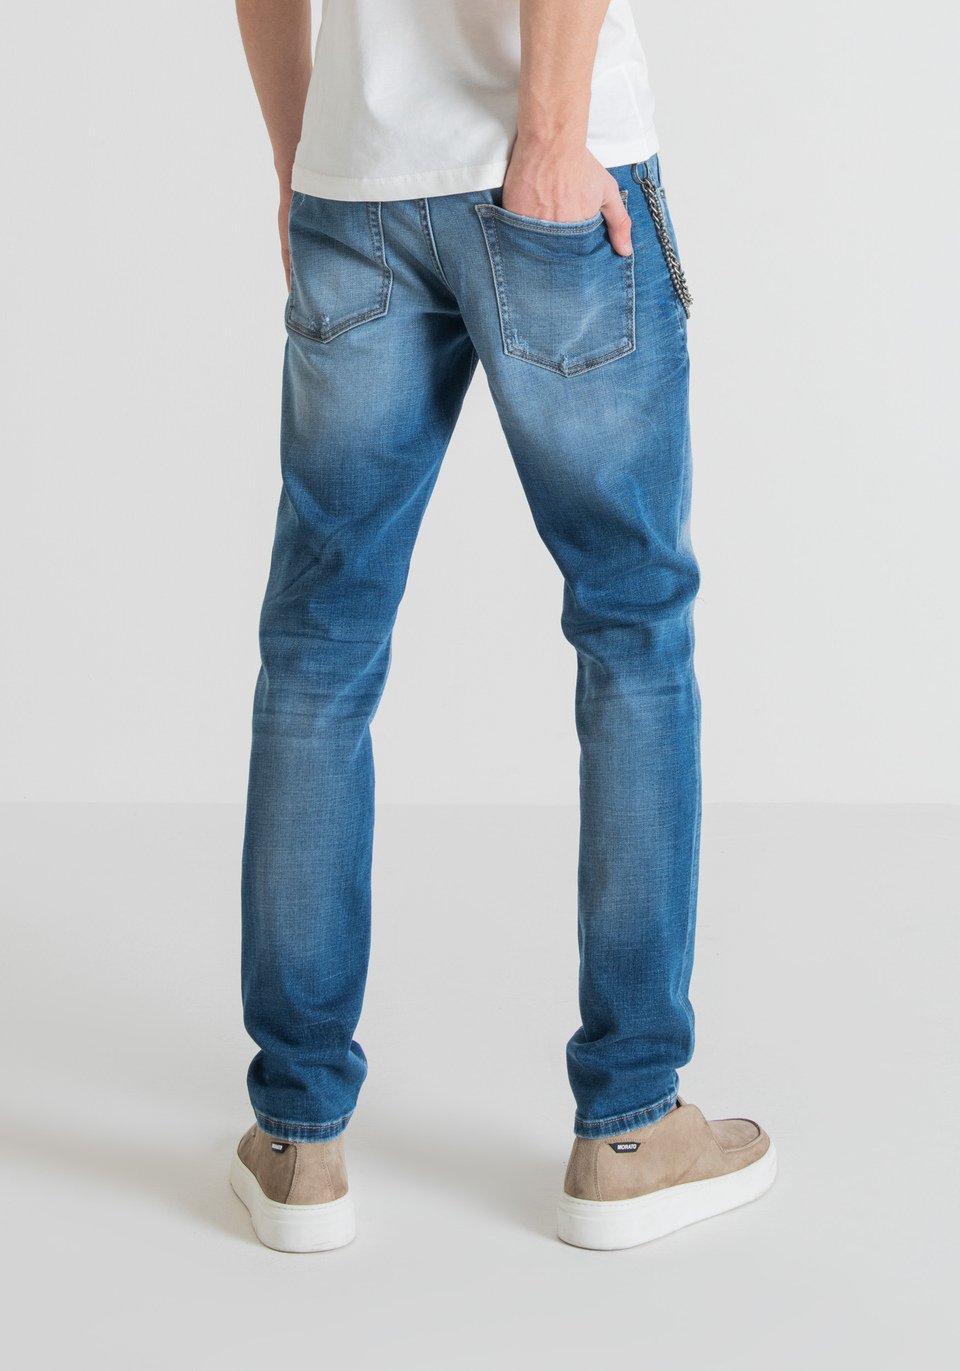 JEANS TAPERED FIT “IGGY” IN STRETCH DENIM - Antony Morato Online Shop